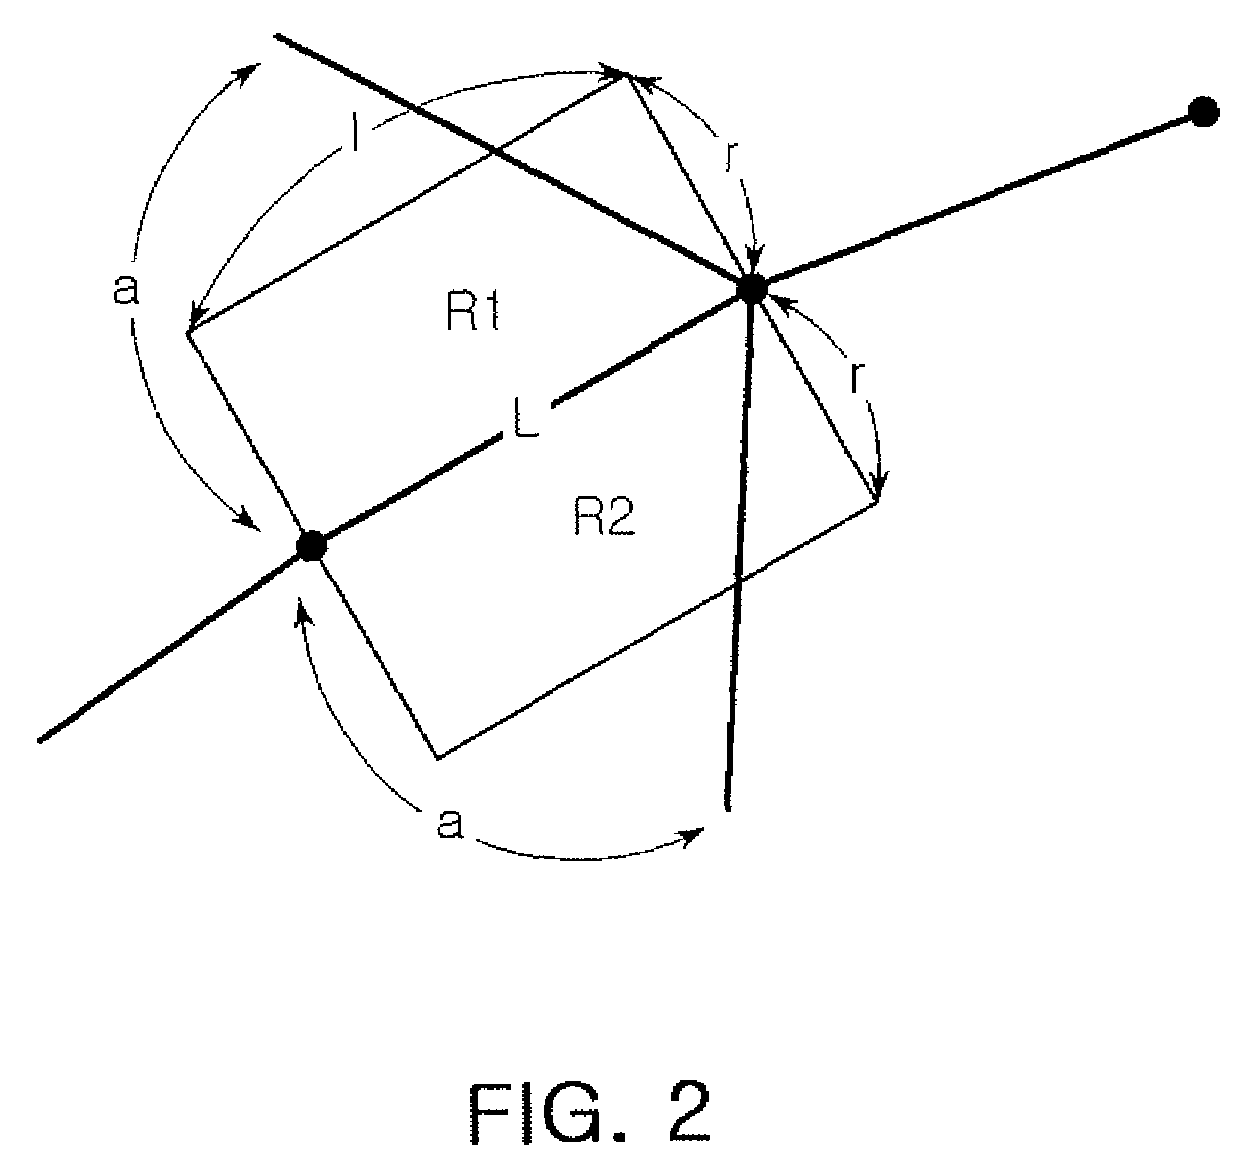 Method and apparatus for shoulder-line detection and gesture spotting detection